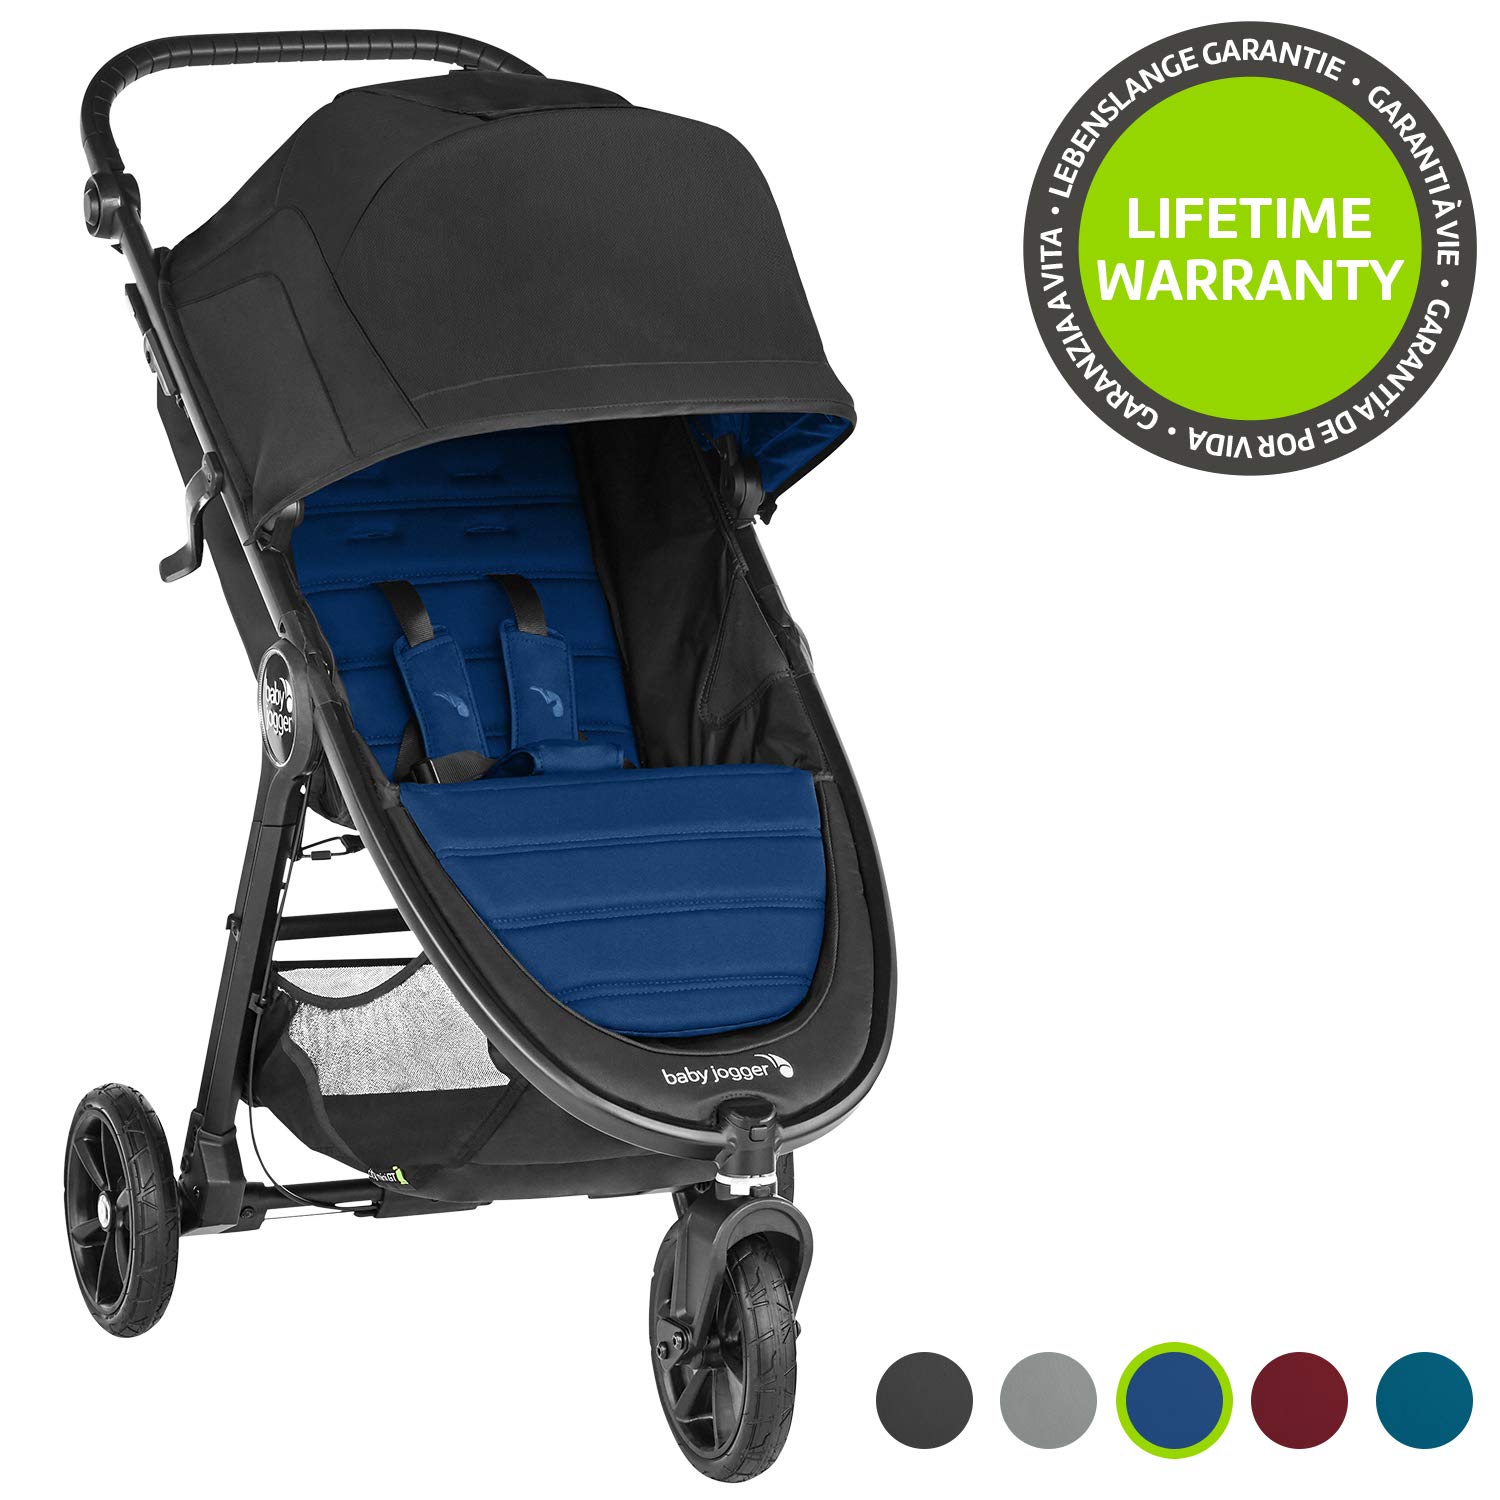 Baby Jogger City Mini GT2 Lightweight Combination Pushchair | All-Wheel Suspension for Any Terrain | Quick Folding Small Buggy | Briar Green (Green)